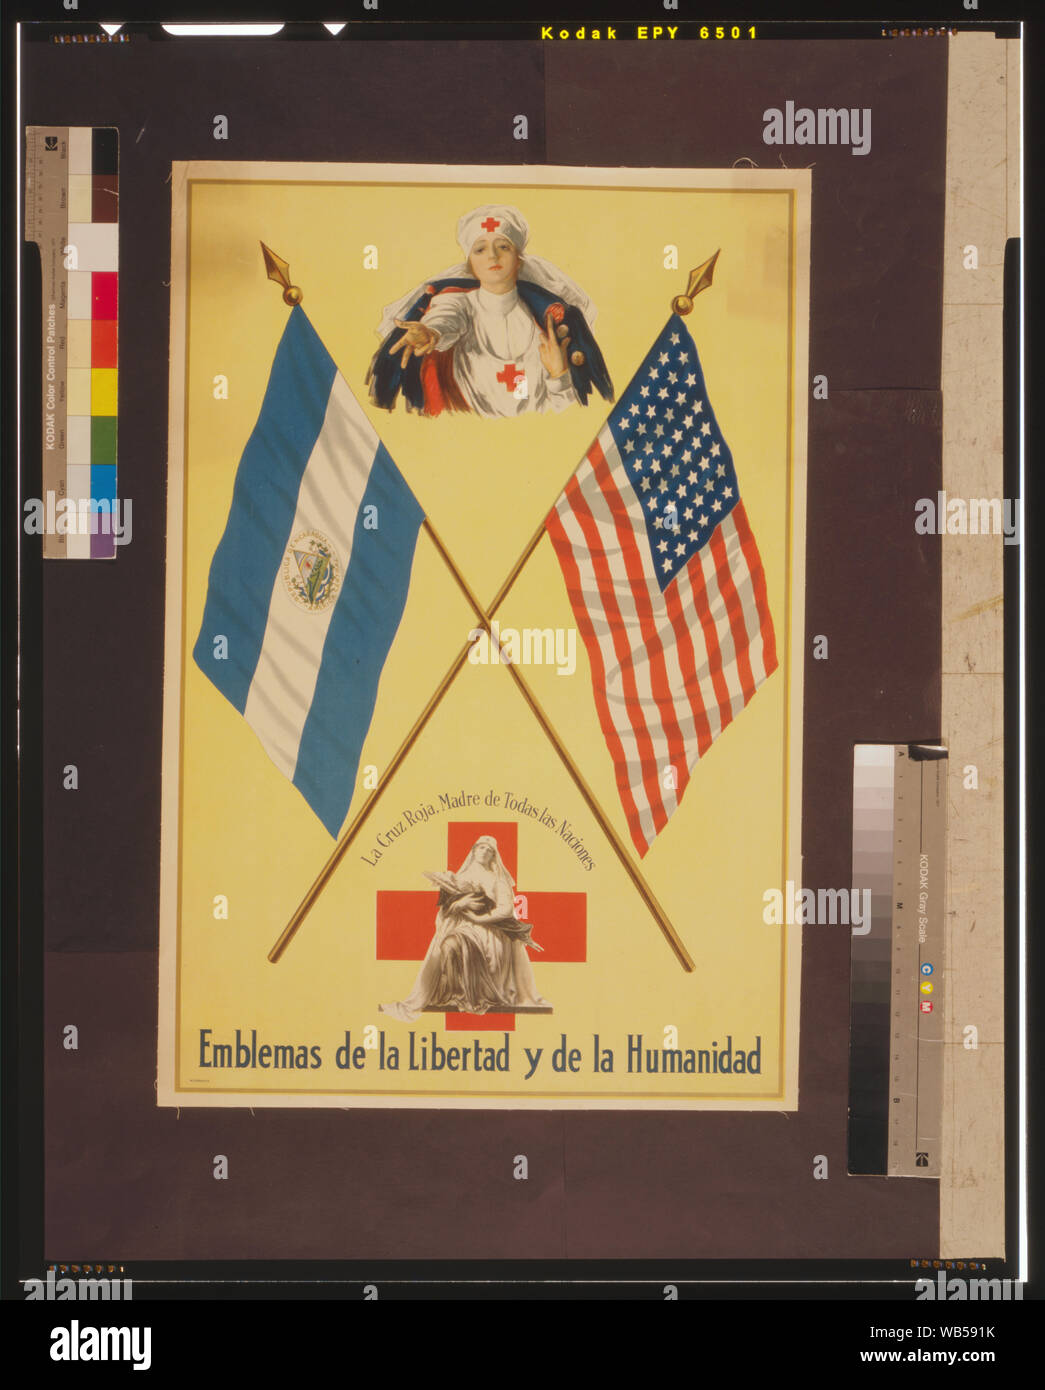 Emblemas de la libertad y de la humanidad Abstract: Poster showing two Red Cross nurses, one, a Madonna figure, cradling in her arms a wounded soldier(?) on a litter, between the flags of Nicaragua and the United States. Stock Photo